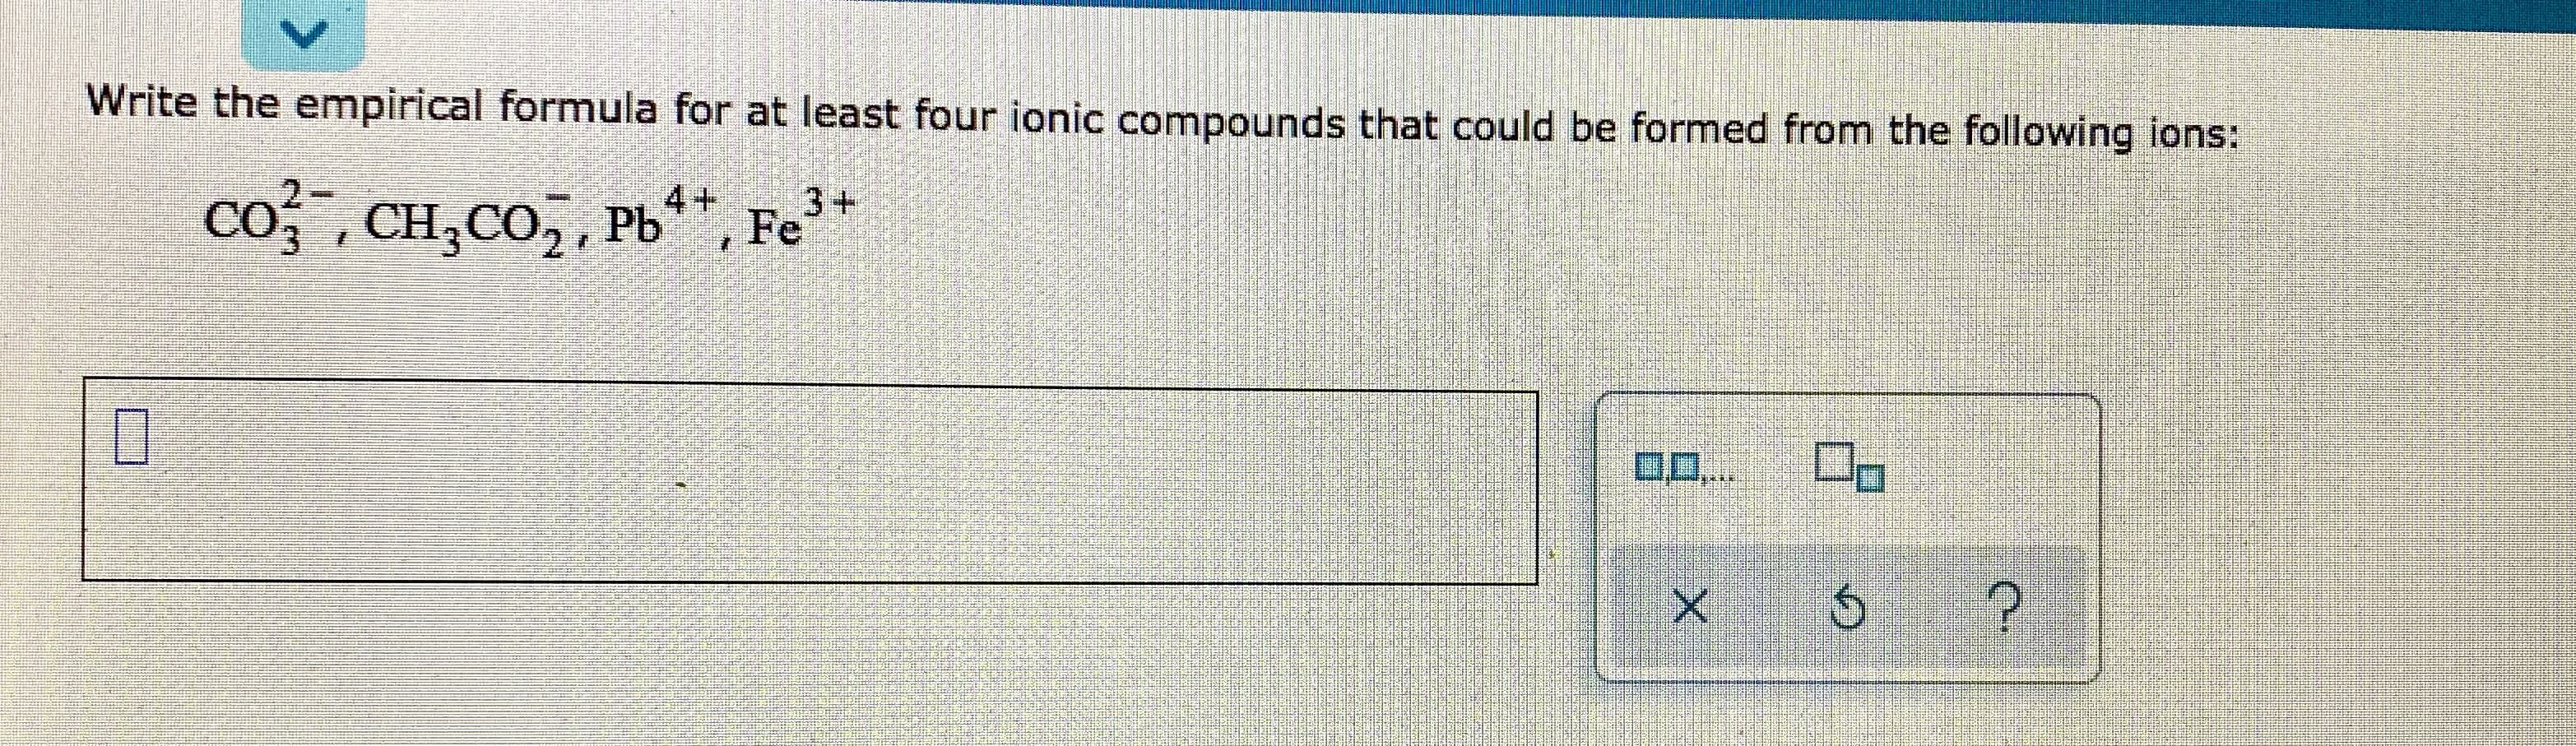 Write the empirical formula for at least four ionic compounds that could be formed from the following ions:
2-
co, CH,CO, , Pb**, Fe3+
